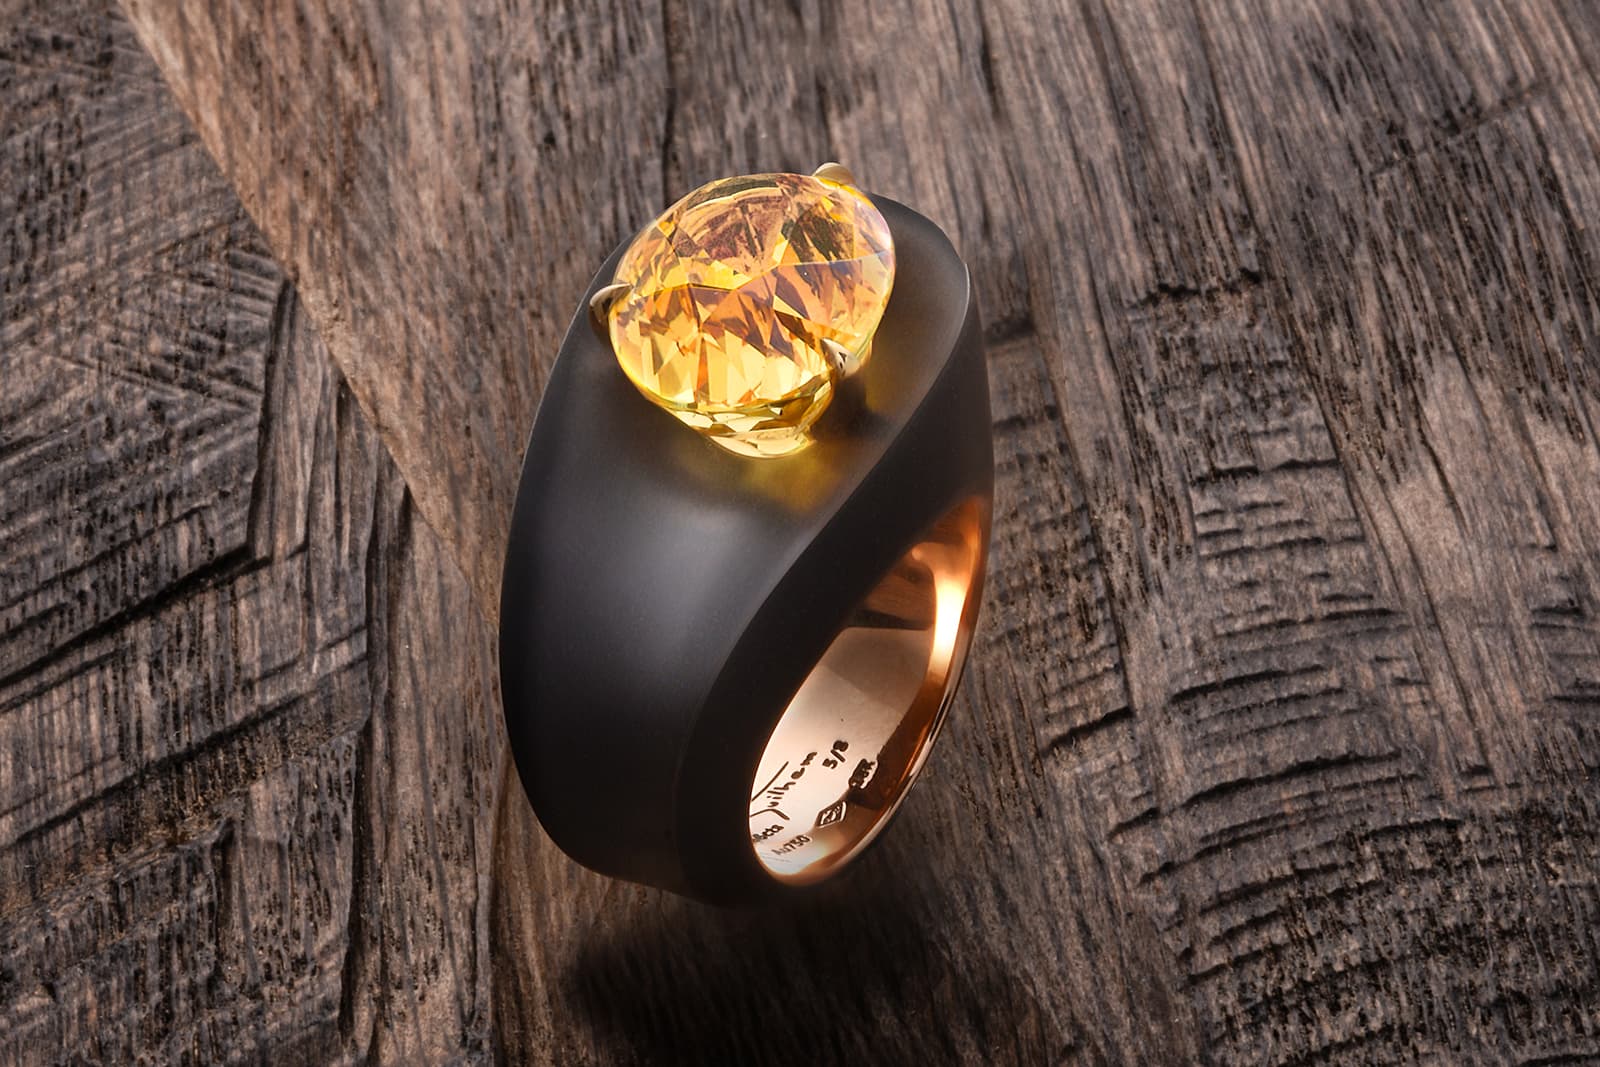 Philippe's Mashandy collection of art rings are crafted in bronze and set with rare and extraordinary stones, like this yellow sapphire